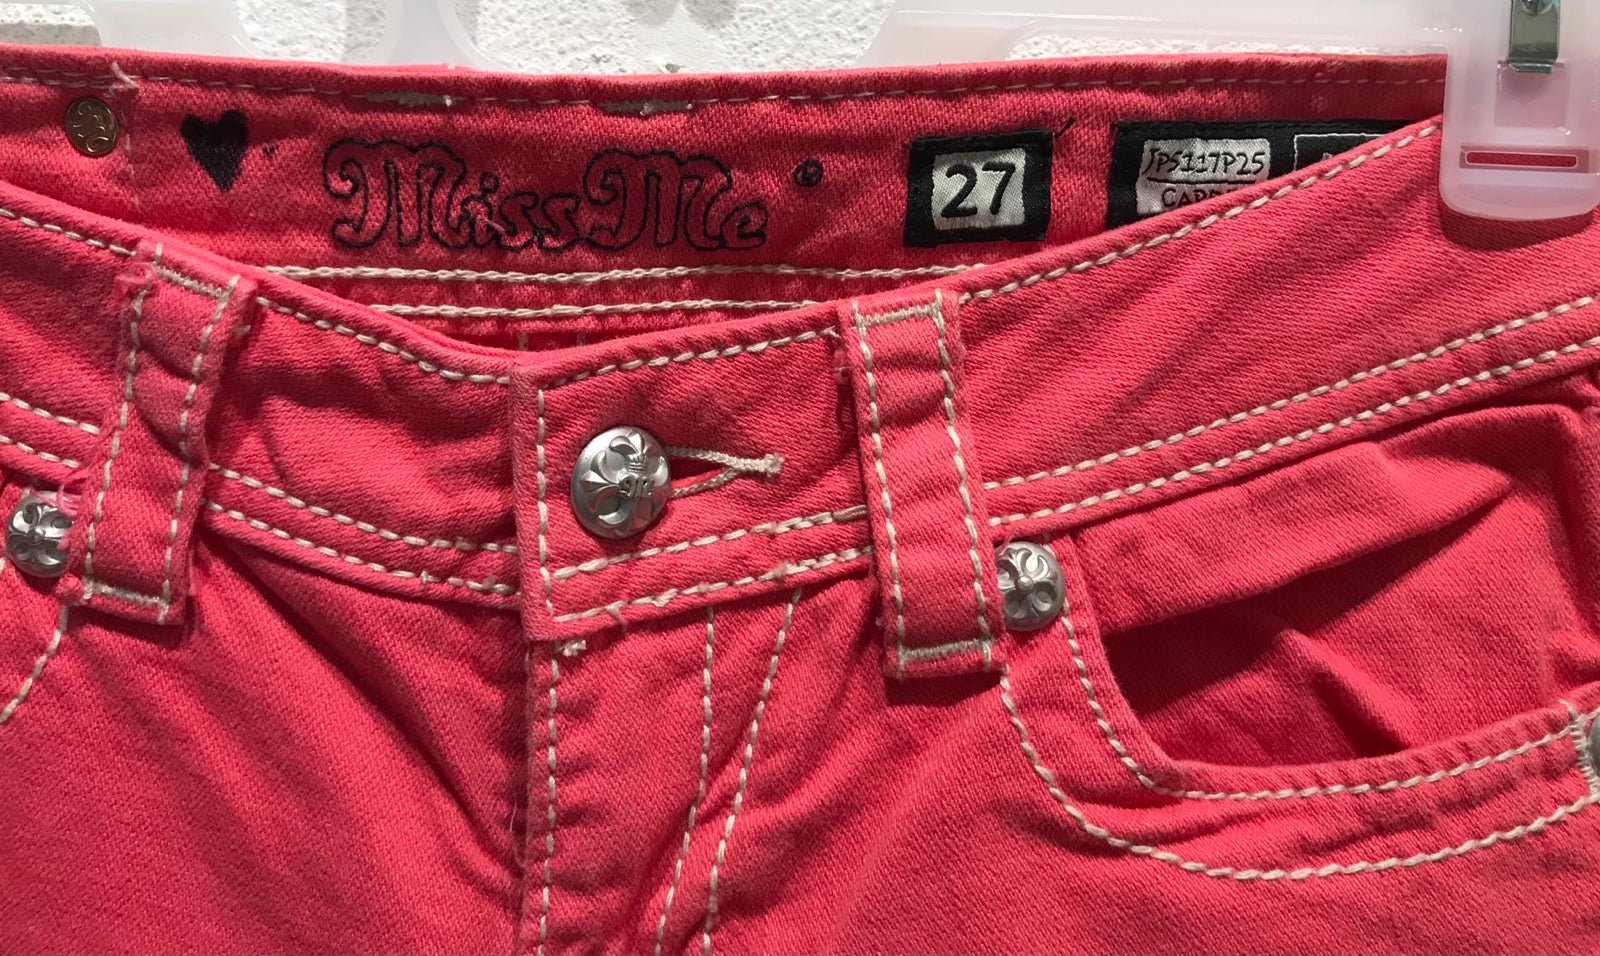 Beautiful Woman’s Miss Me Pink Blinged Out Capri Jeans pPp3JxH2L Discount